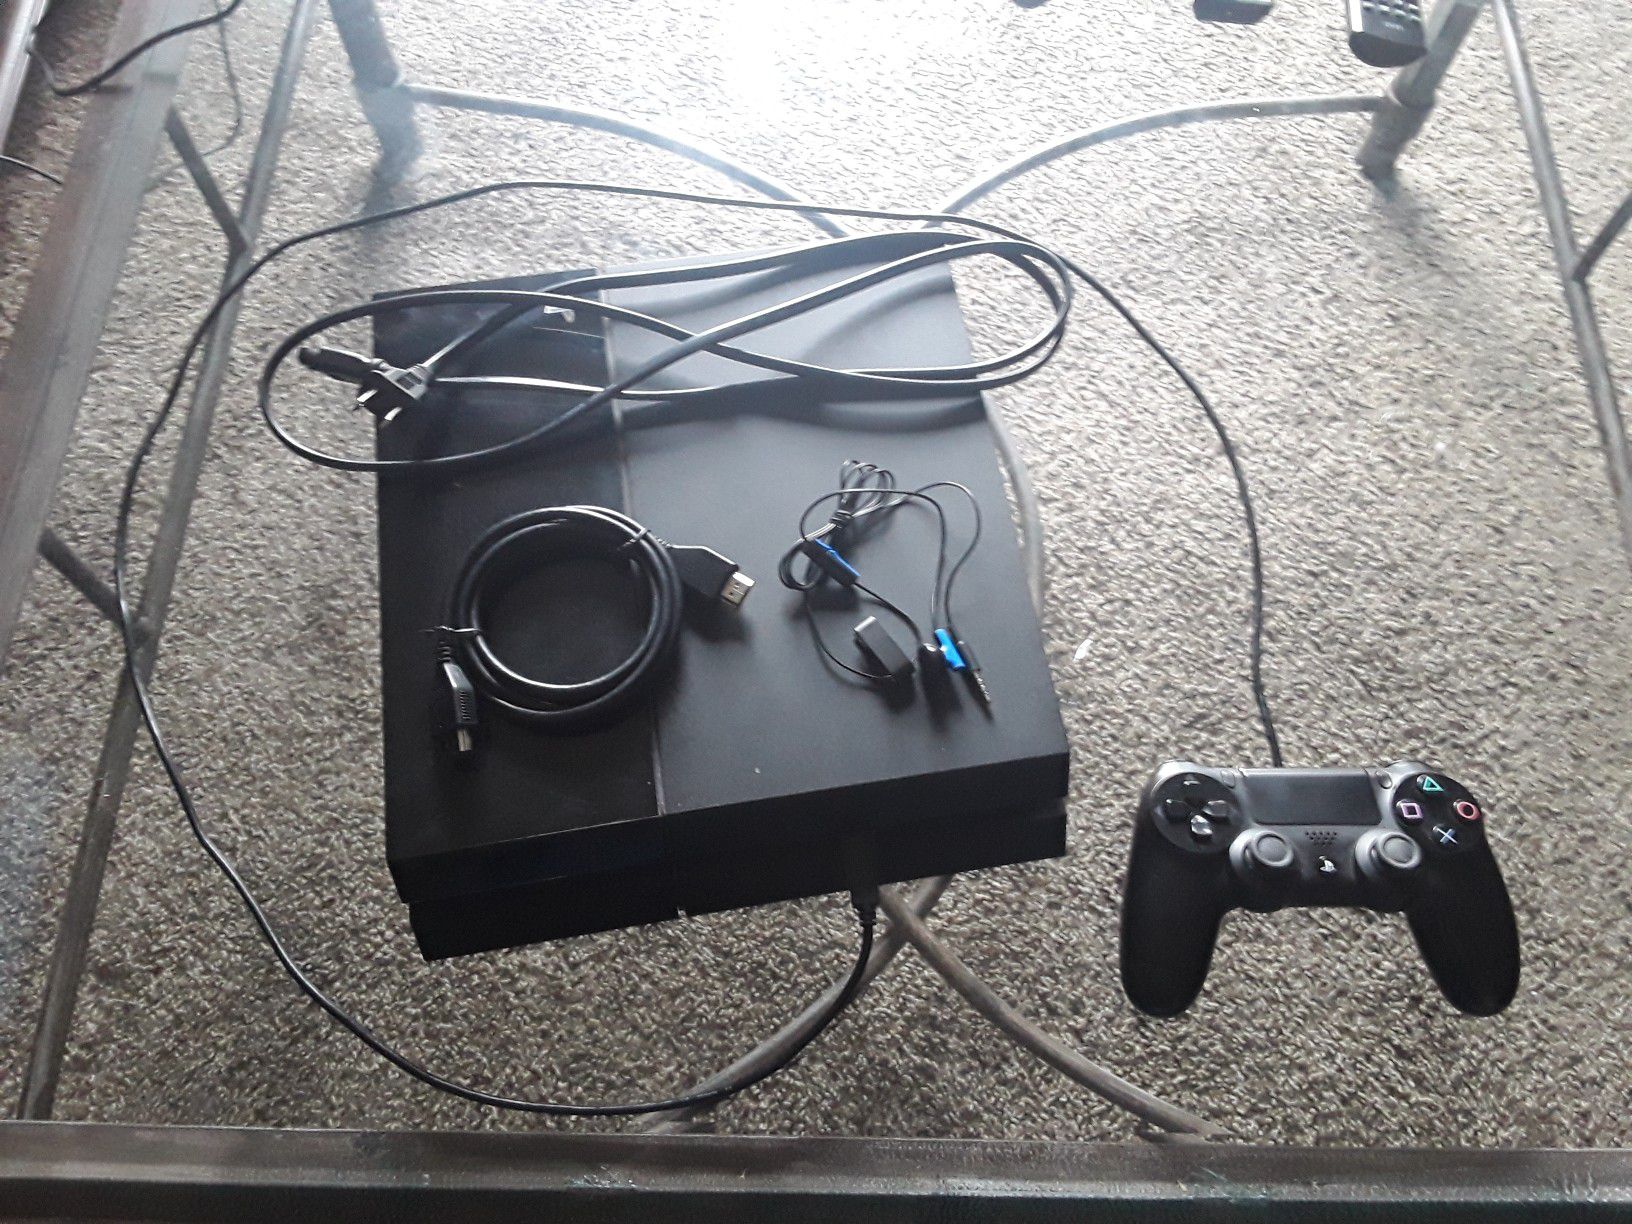 Playstation 4 with Controller and unused chat earpiece